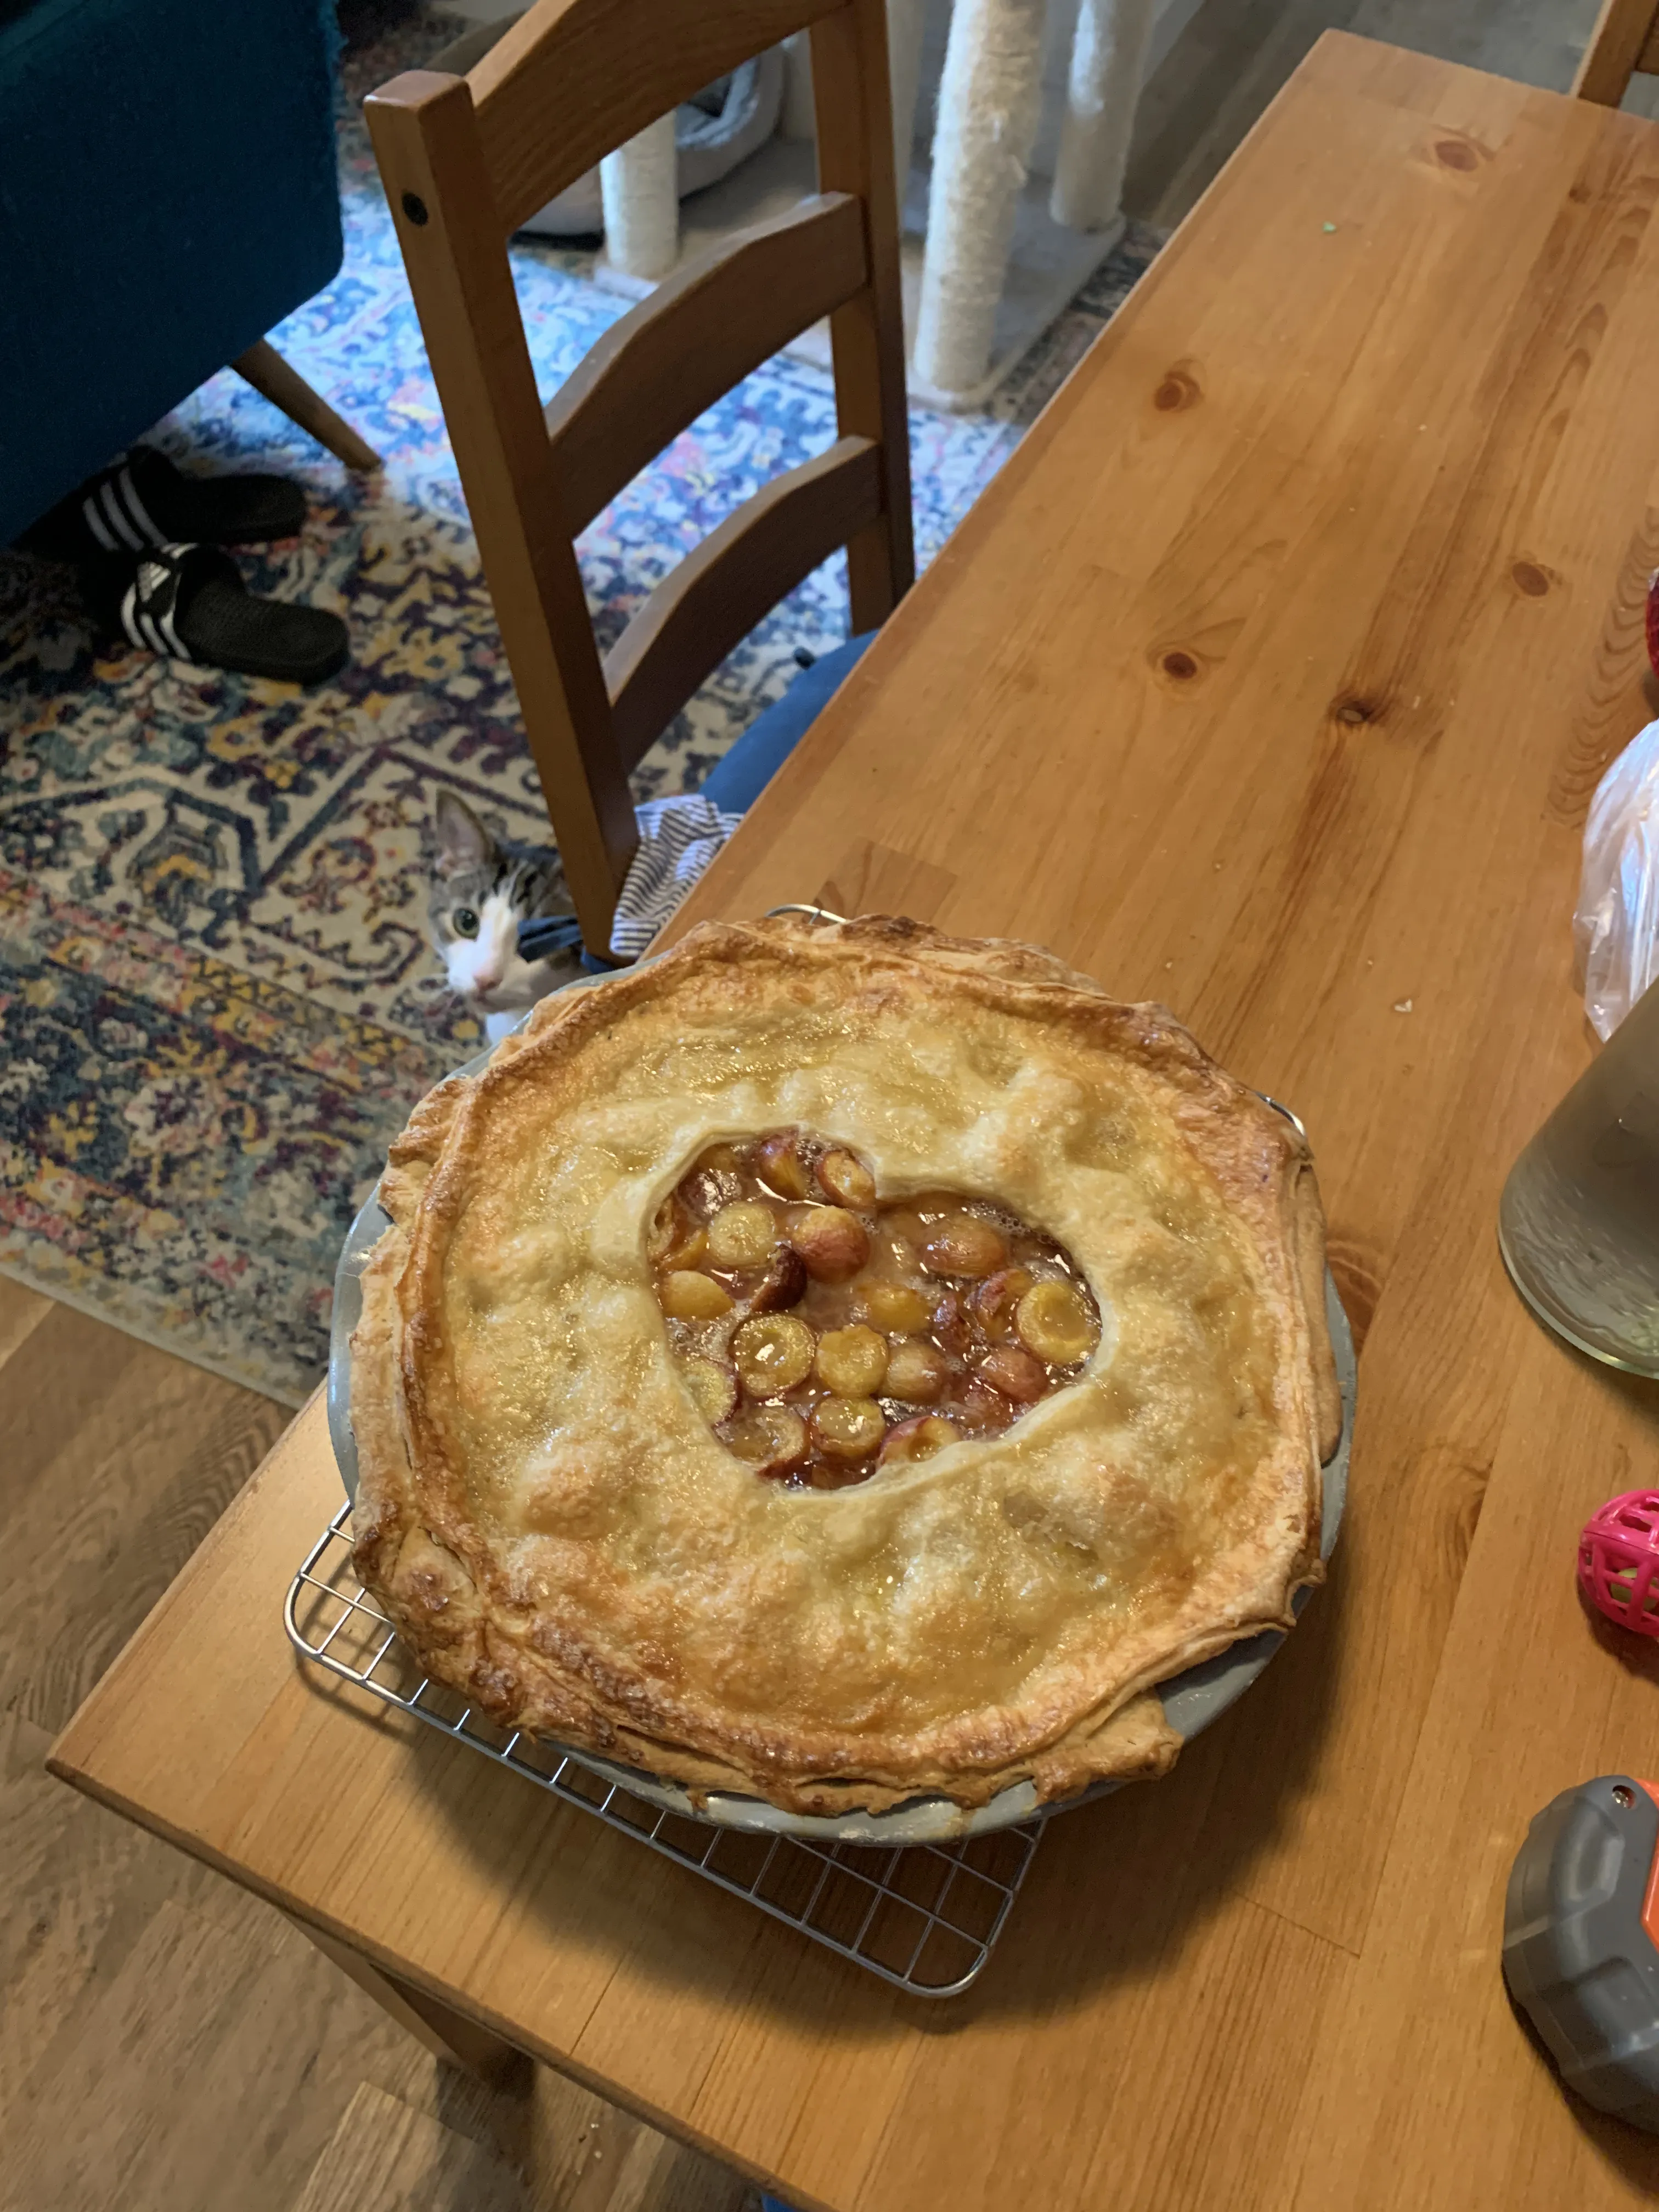 Finished pie with my cat, Fonzie, looking into the camera